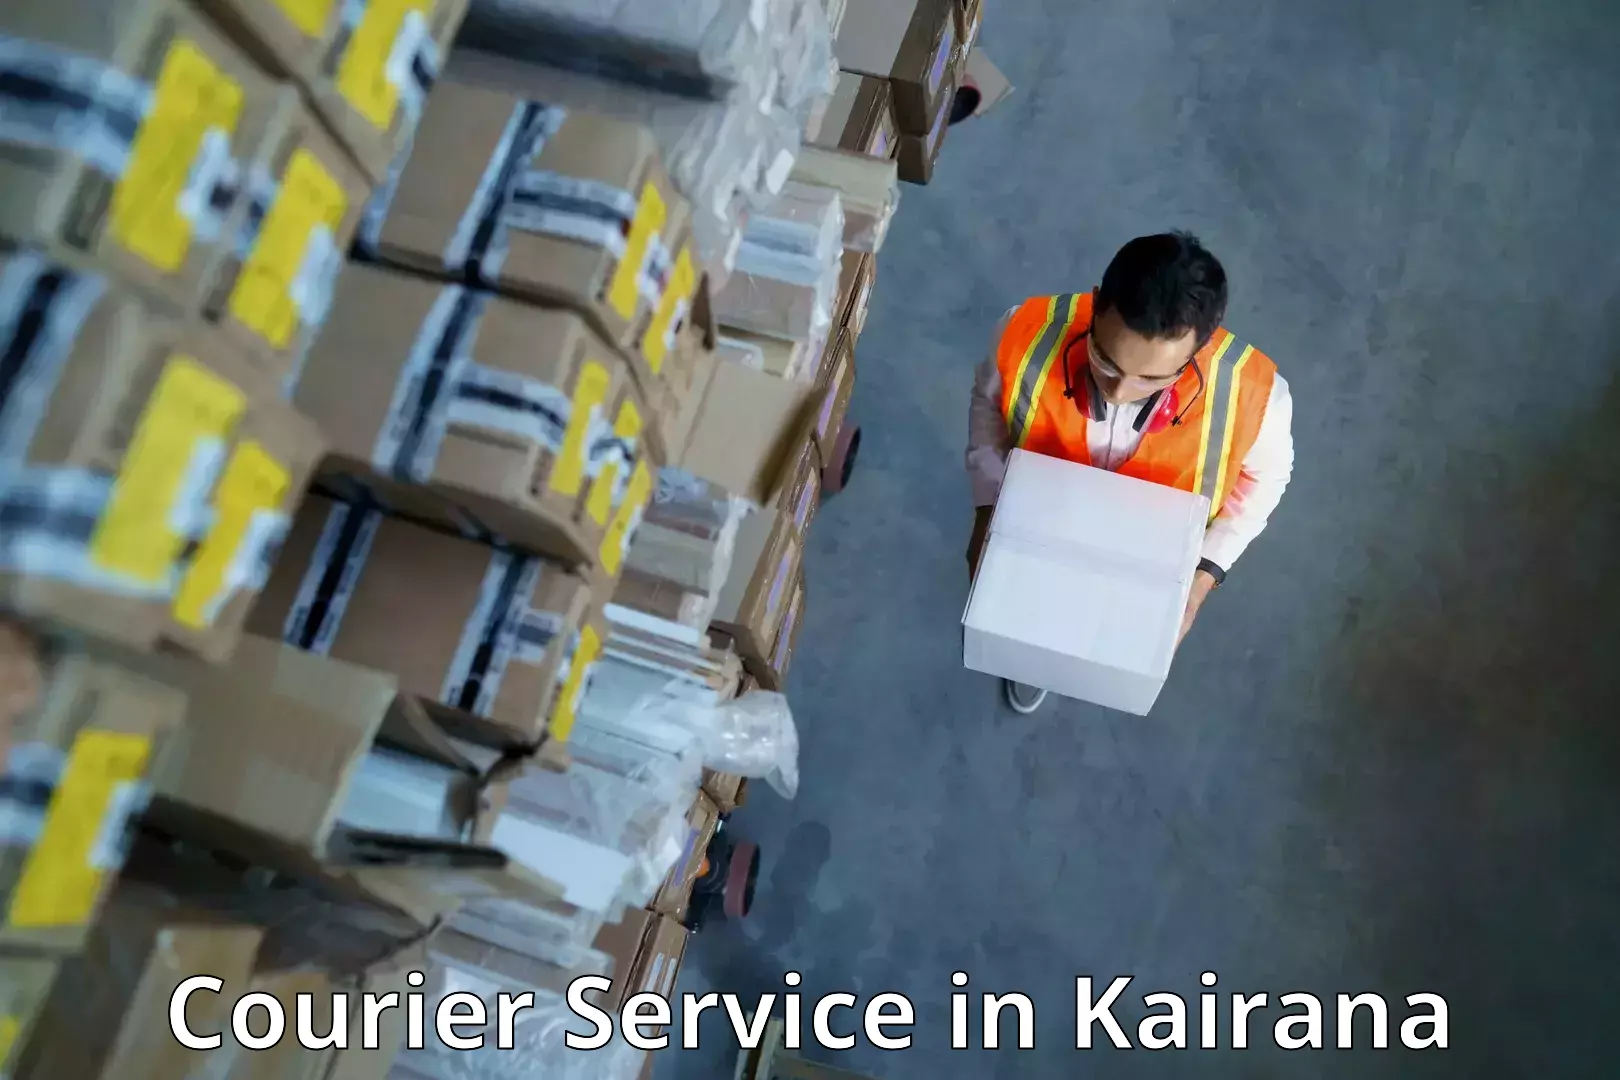 Sustainable courier practices in Kairana